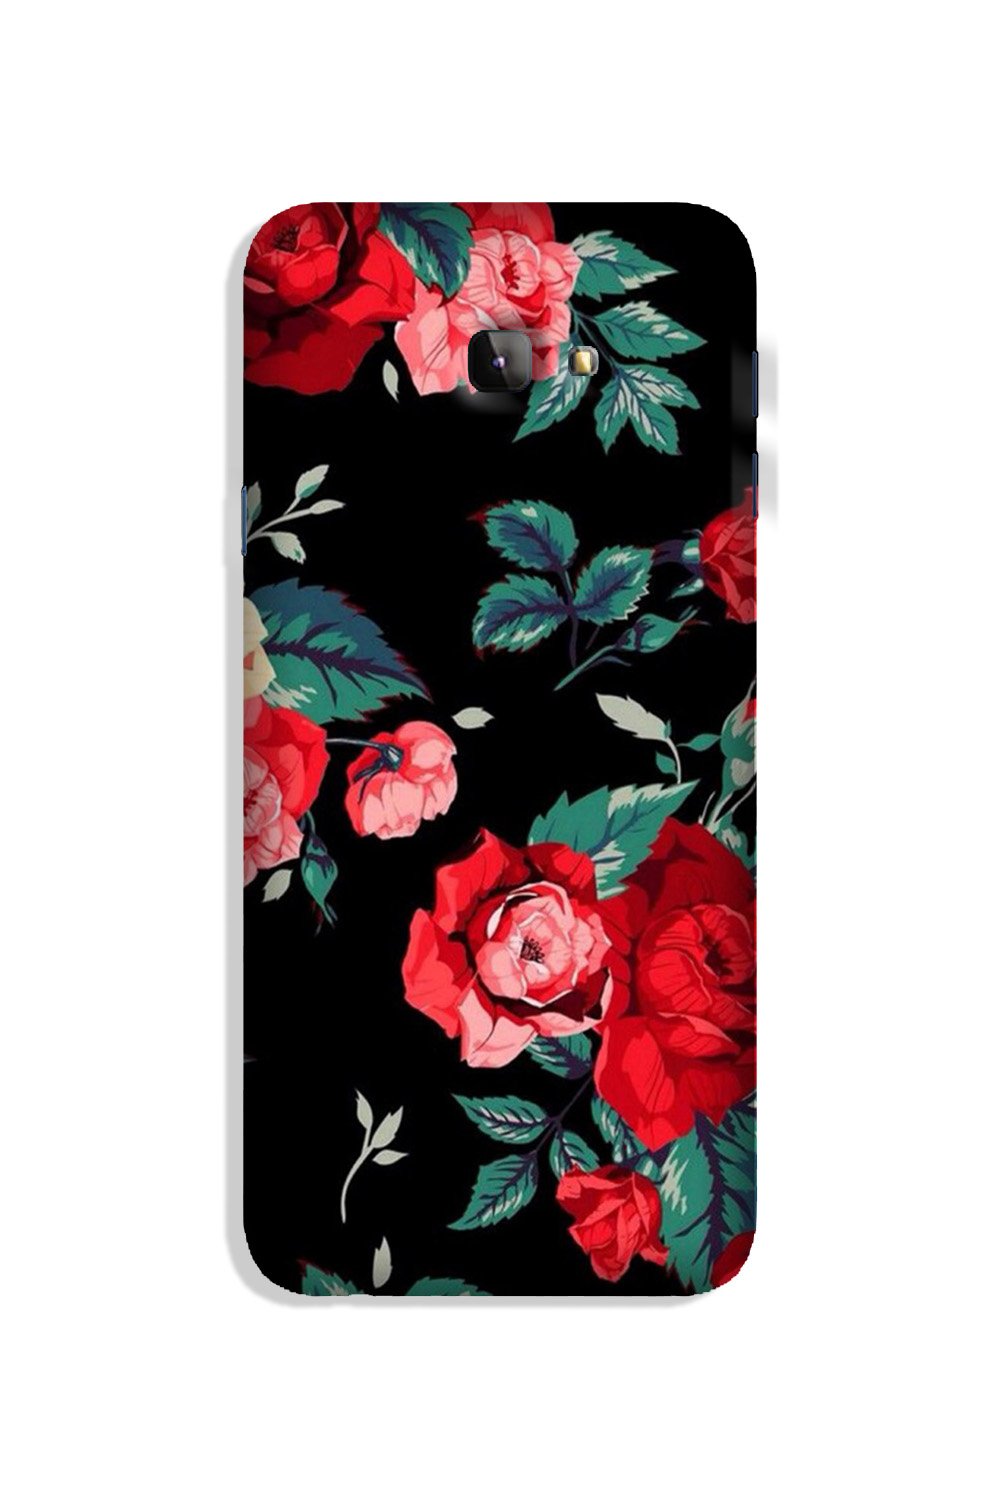 Red Rose2 Case for Galaxy J4 Plus